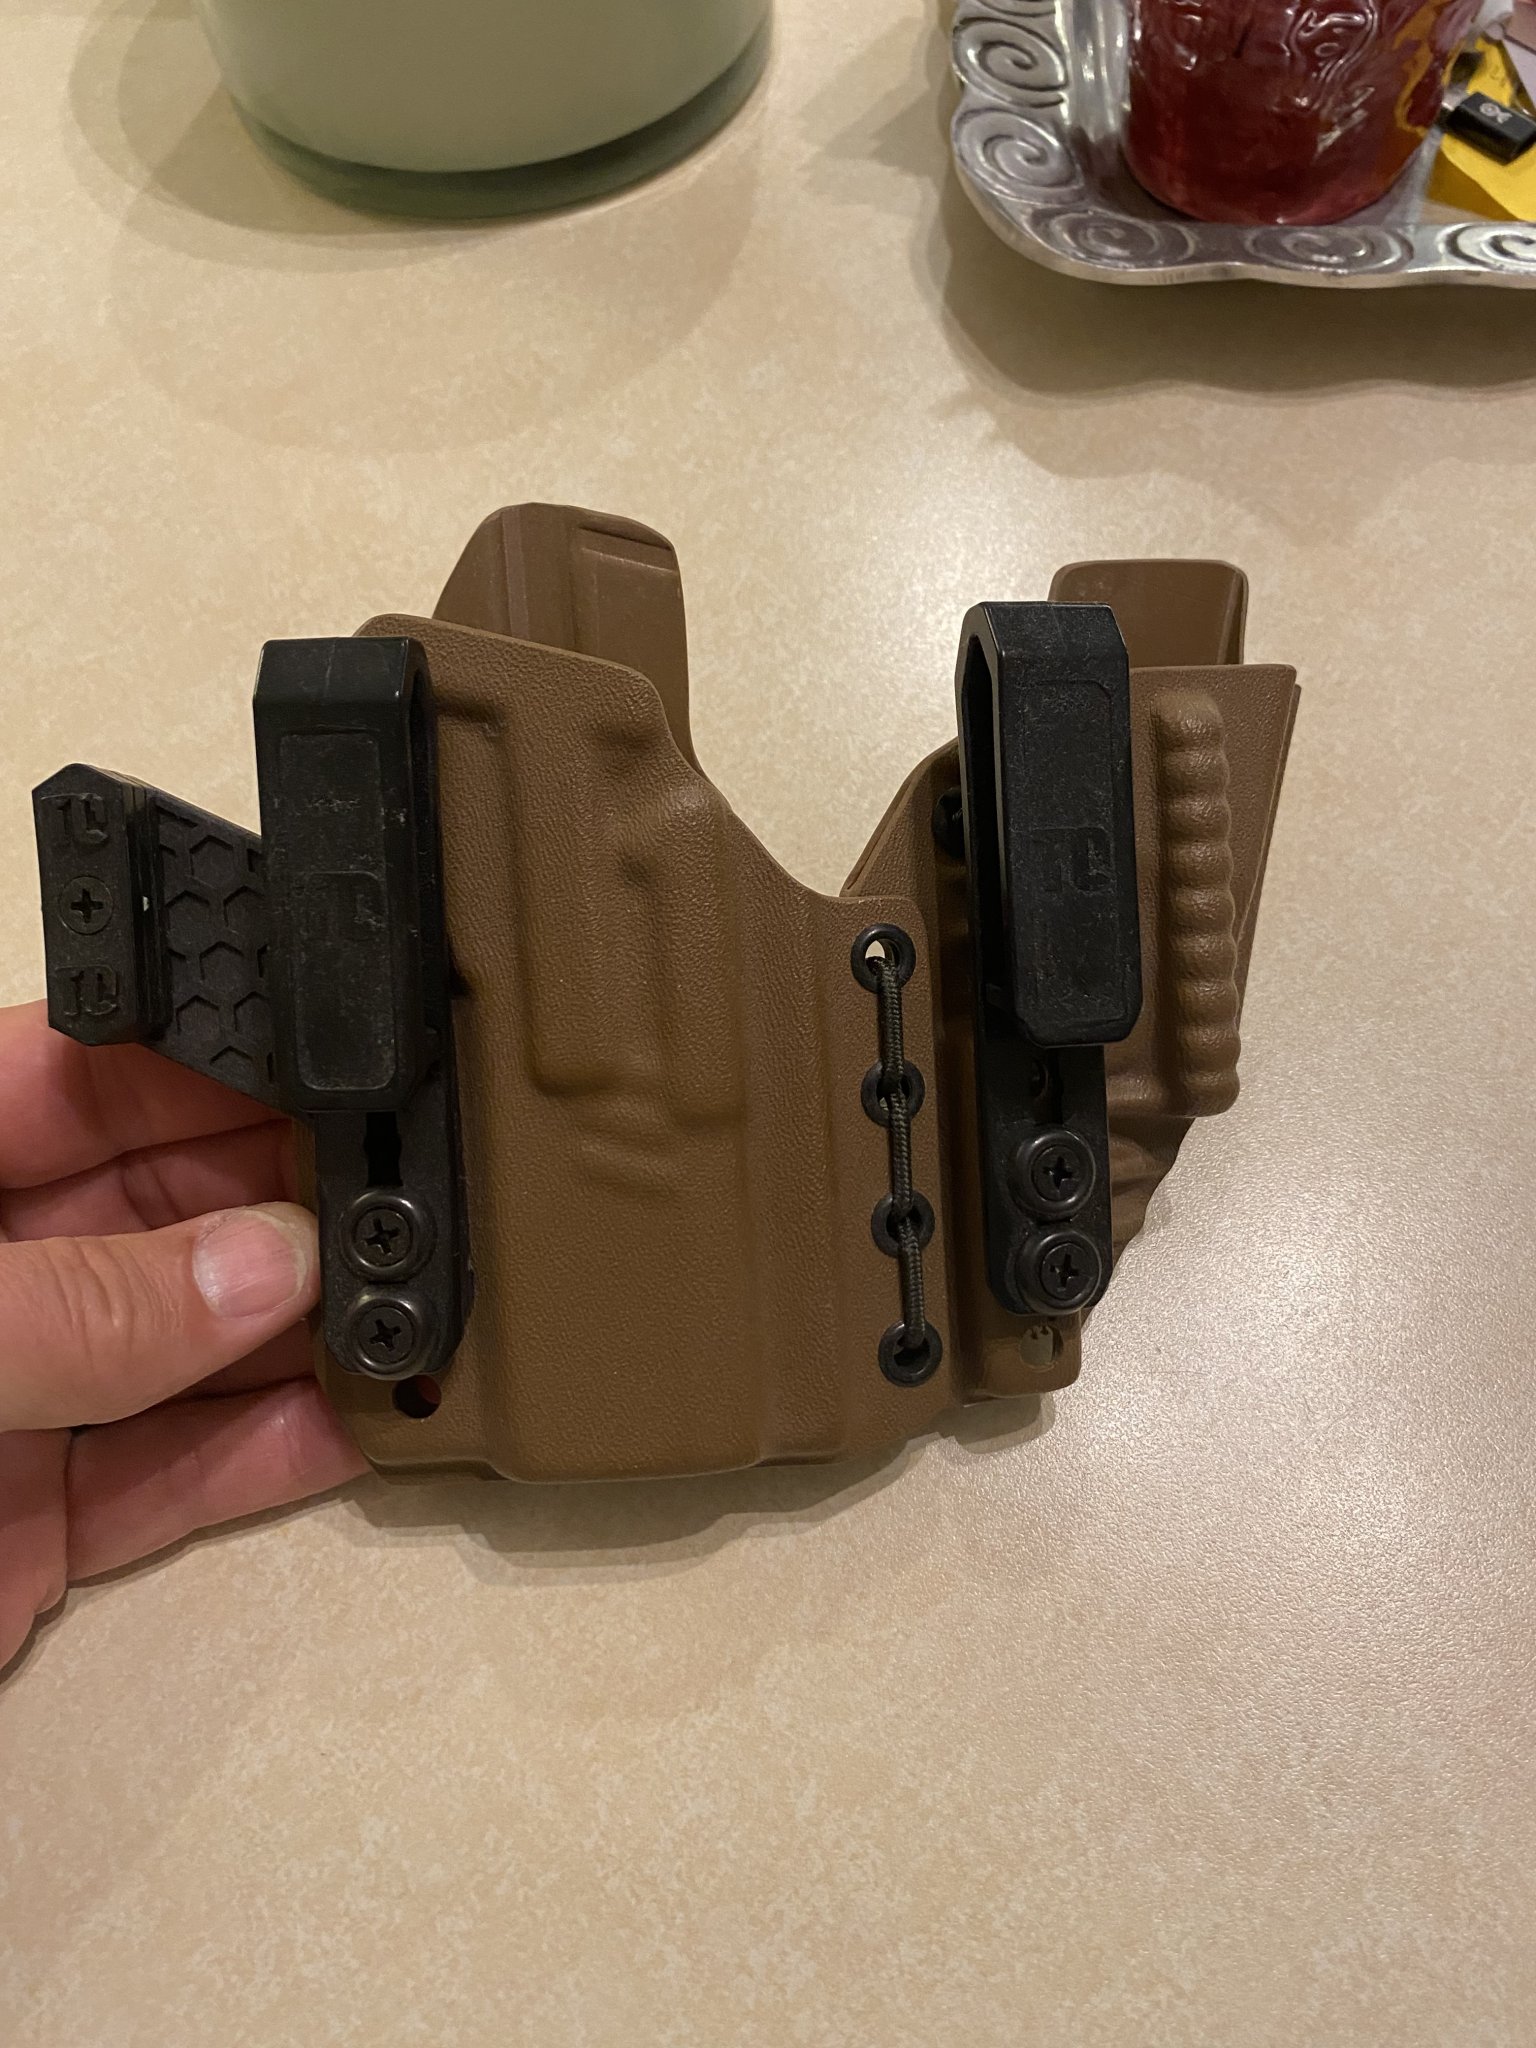 WTS Tier 1 axis elite with ulti clips for 365x $120+shipping I can